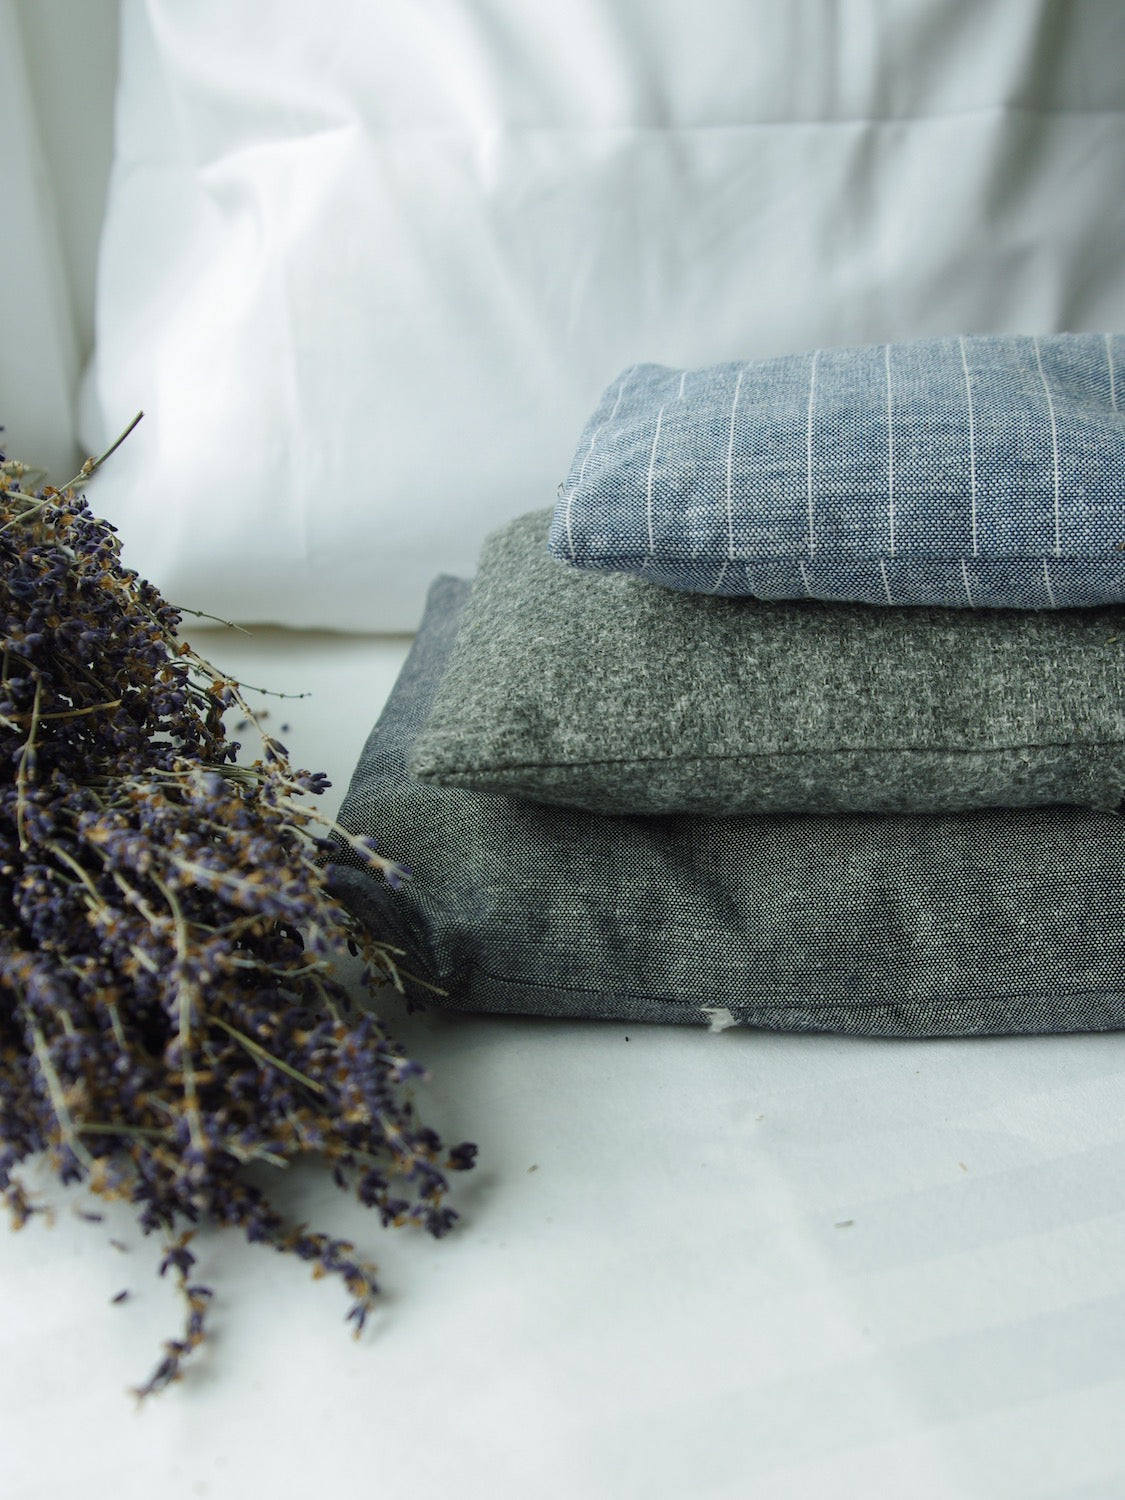 French Dry Goods Lavender Sachet Pouch - Grey Wool French Dry Goods Brand_French Dry Goods Home_Decor Home_French Nostalgia Home_Gifts Home_Provençal Style New Arrivals new arrivals 2023 lavender-sachet-linen-pouches-french-dry-goods_20E81F9C-1125x1500_bb07a98a-ad5f-4494-ba26-423d539c0740